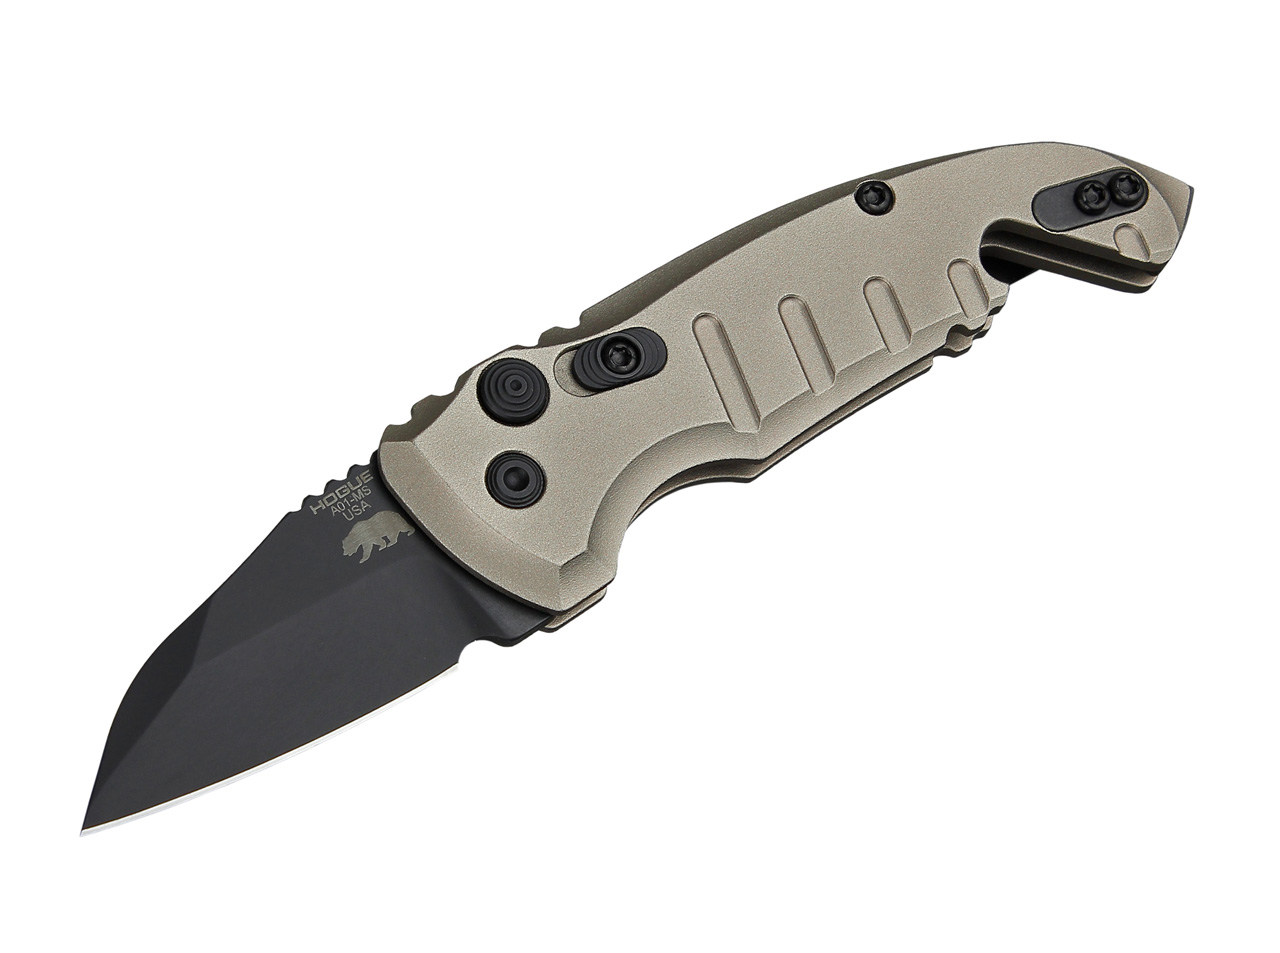 A01 Microswitch Compact Wharncliffe Dark Earth